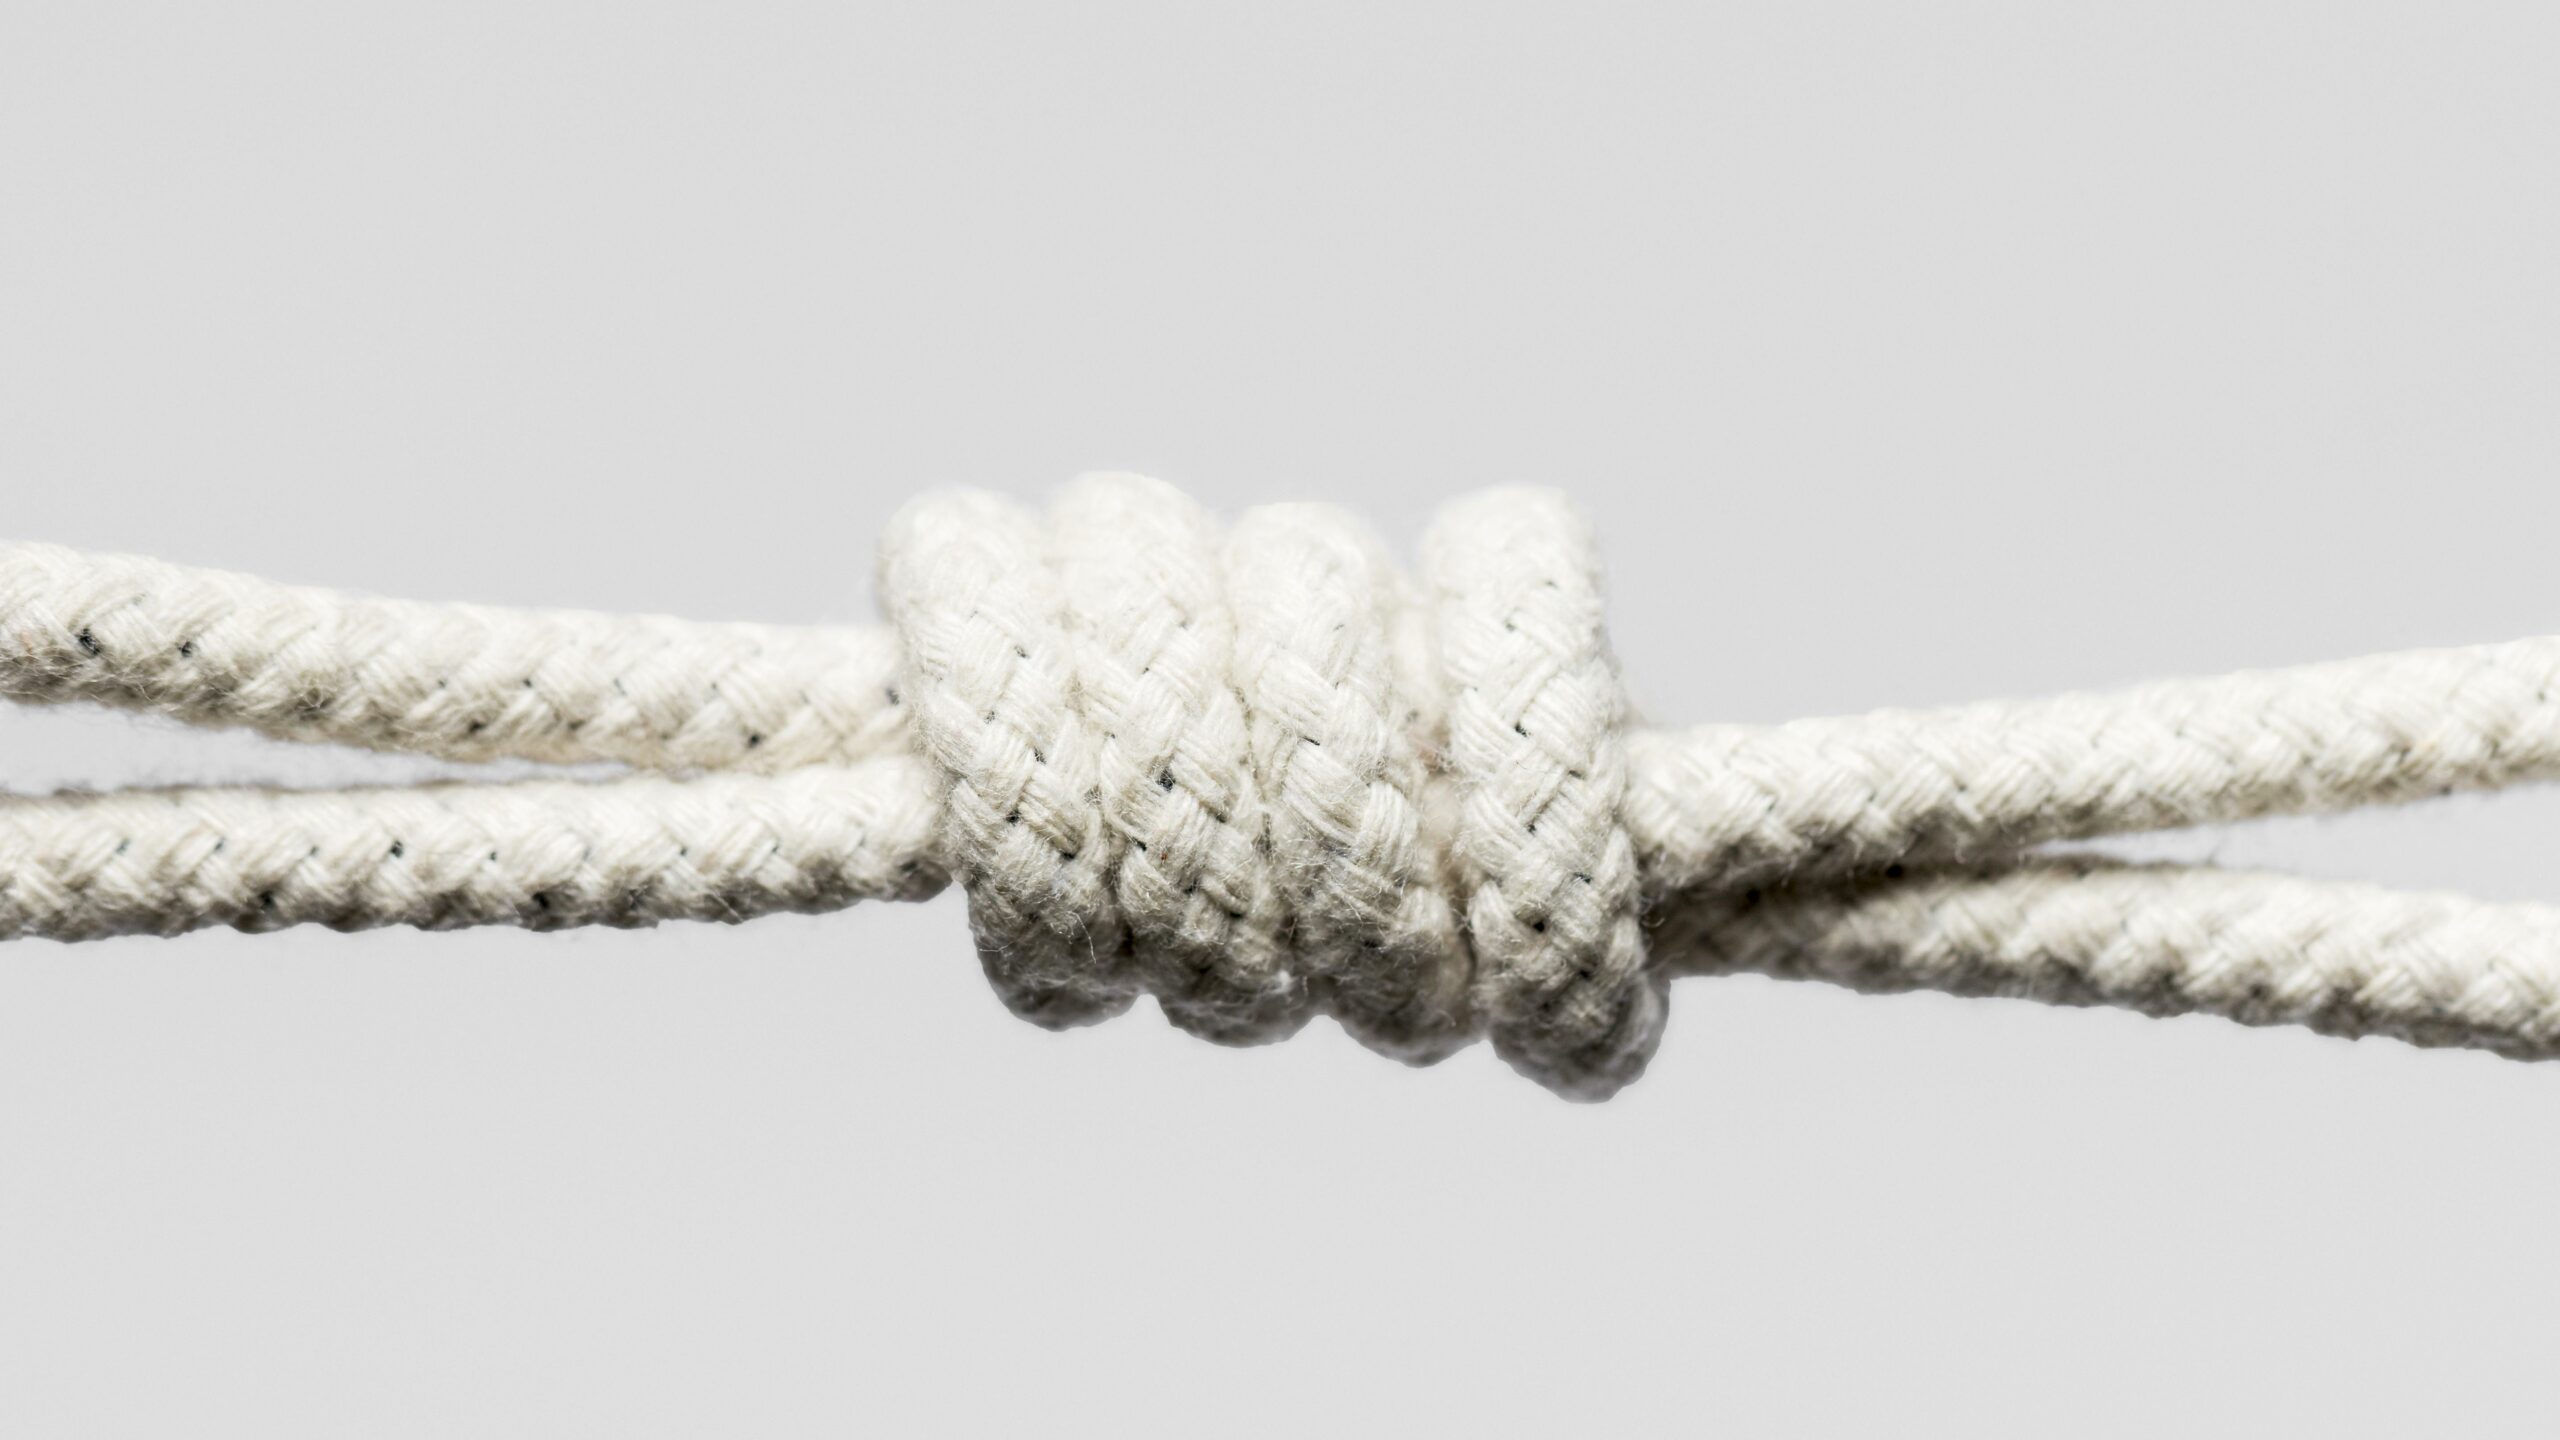 A close-up photo of a rope with a properly tied figure-eight knot for rappelling